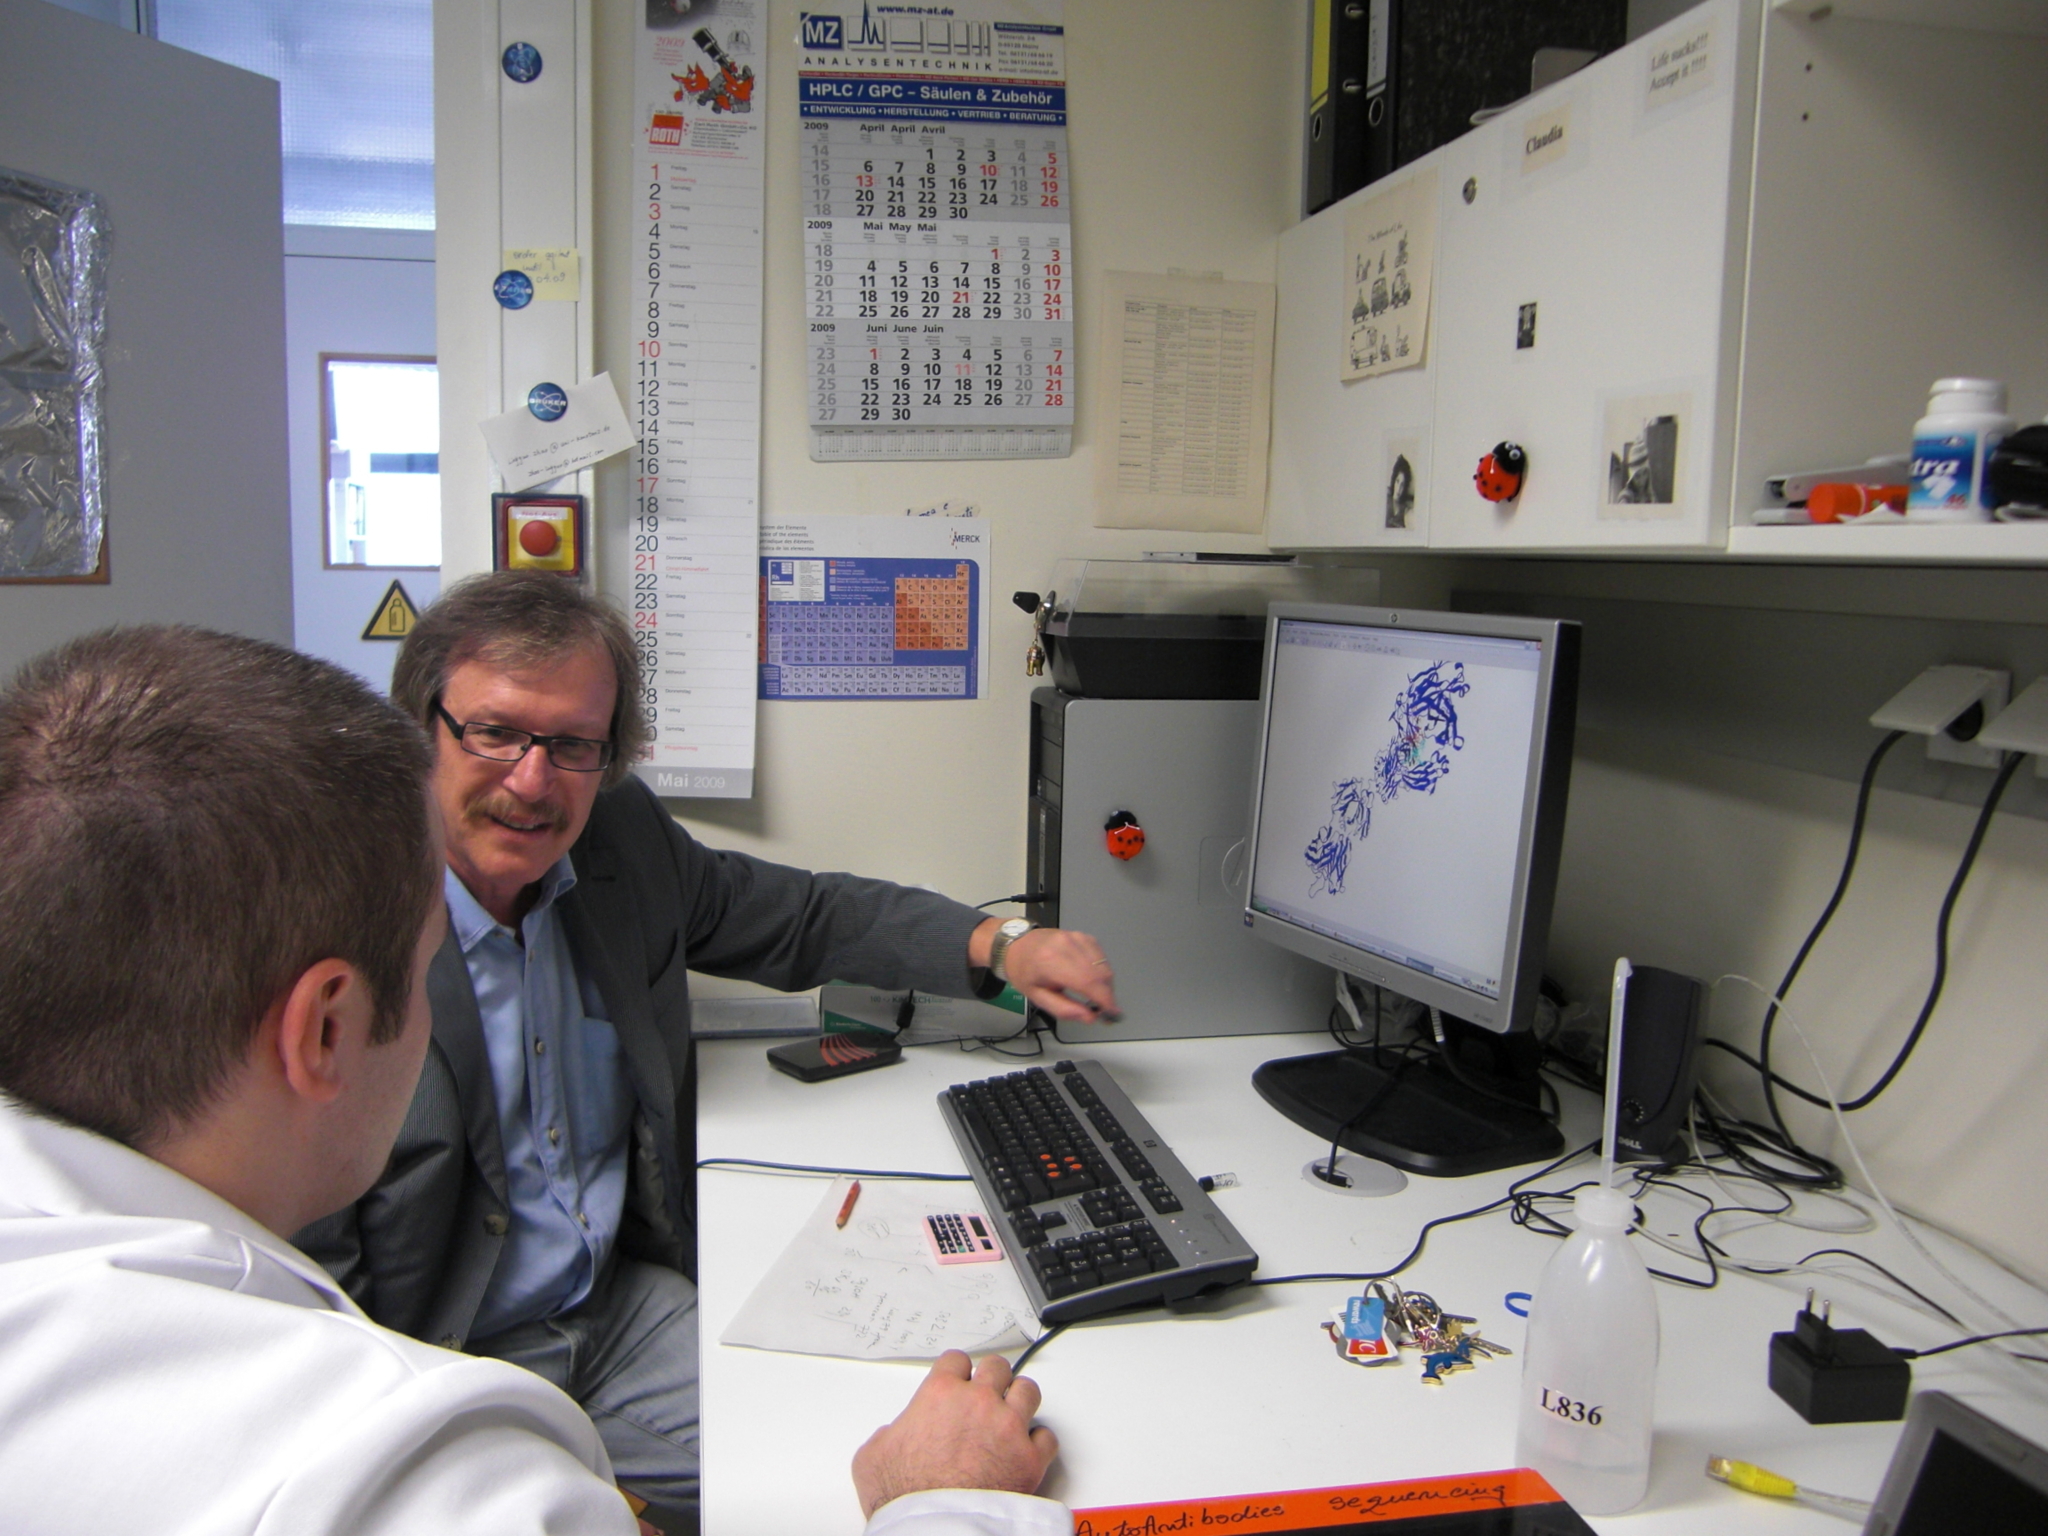 Prof. Michael Przybylski and one of his colleagues in the office, looking at a virtual antibody model.